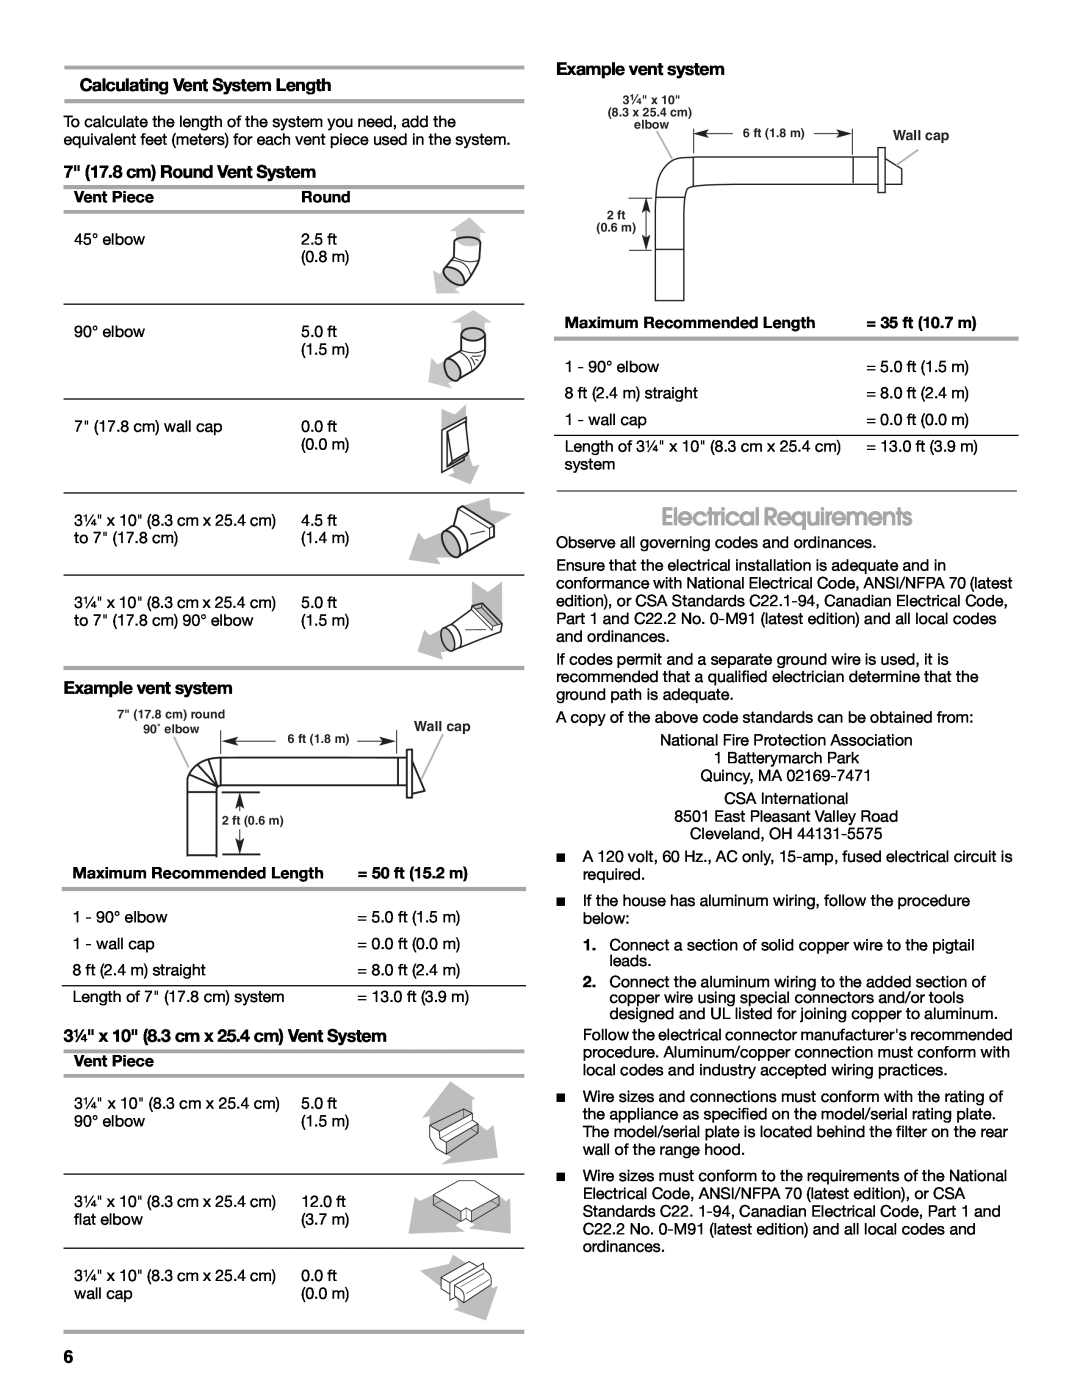 Whirlpool UXT5230AYW Electrical Requirements, Calculating Vent System Length, 7 17.8 cm Round Vent System, Vent Piece 